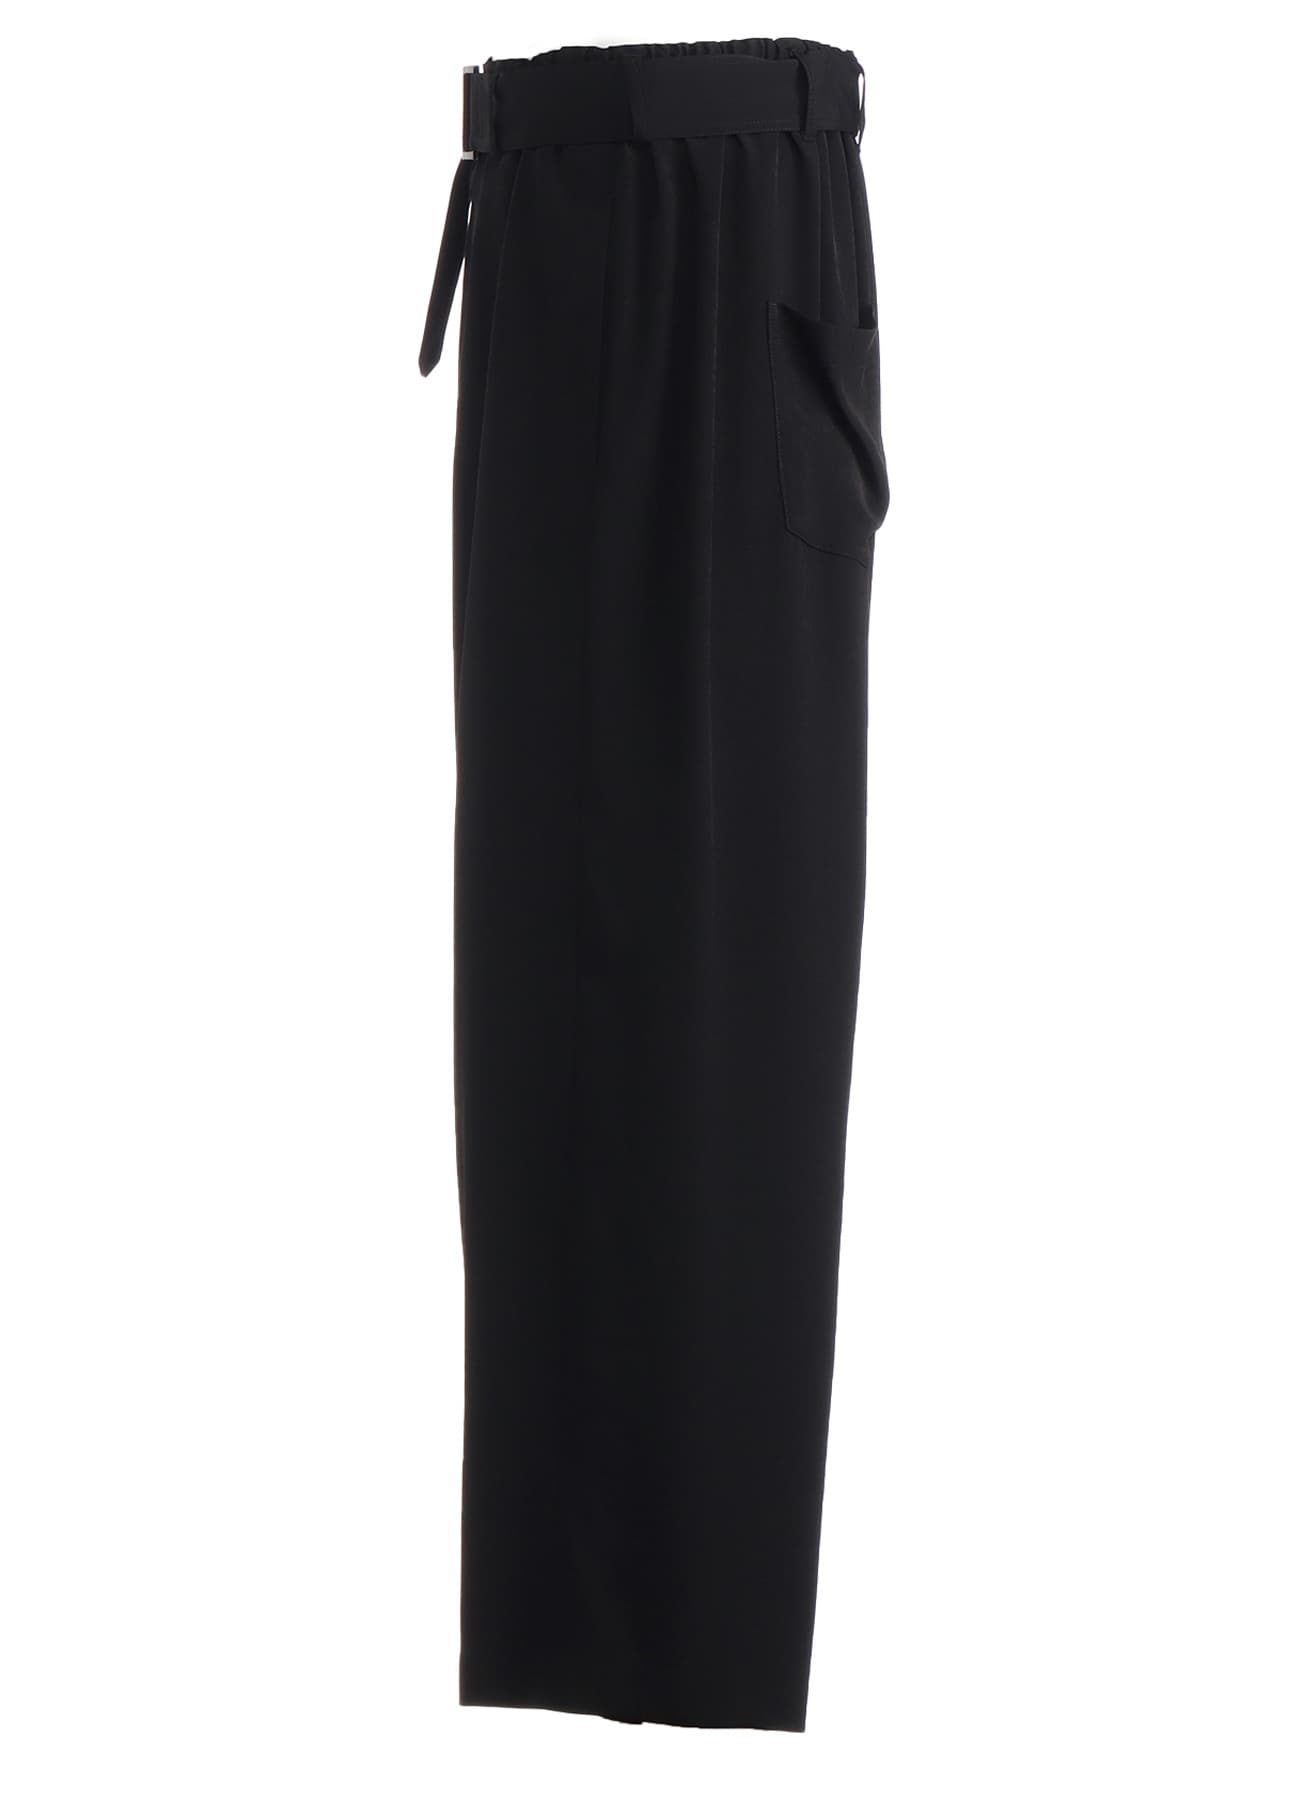 TRIACETATE/POLYESTER CREPE de CHINE EXTRA WIDE FRONT SEAM PANTS